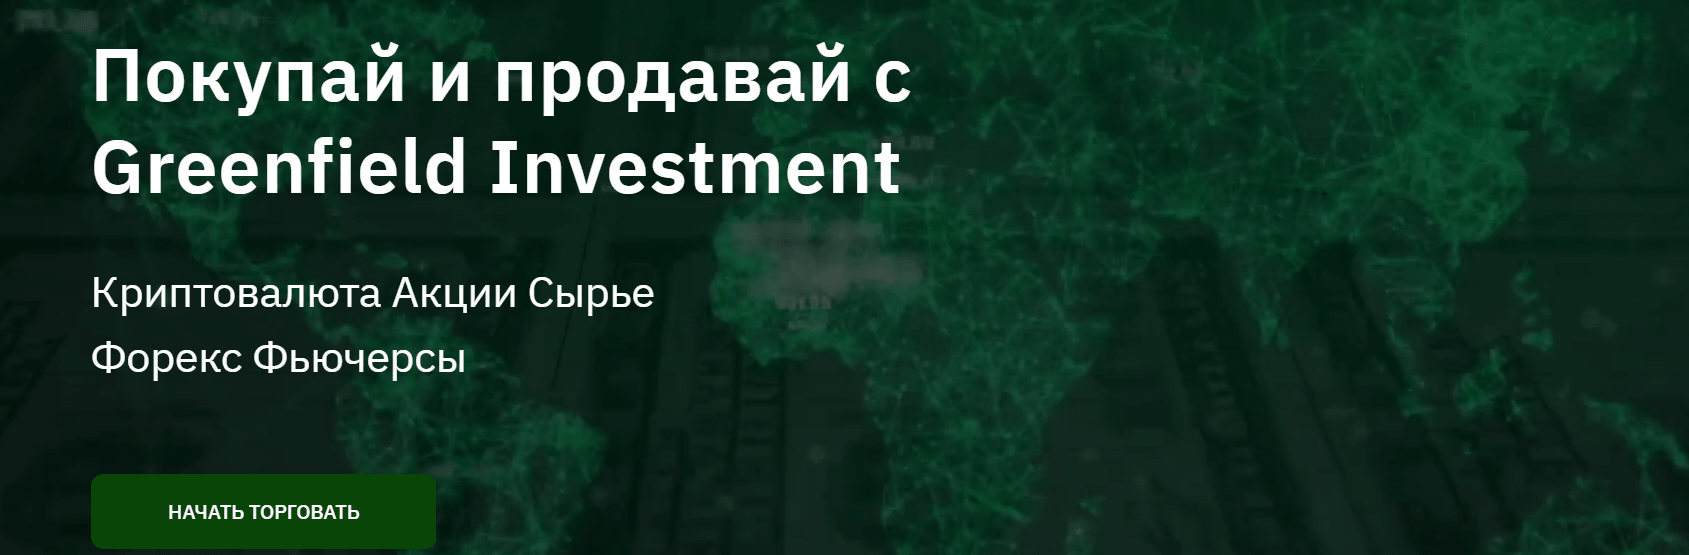 Greenfield Investment - разбор фирмы, Фото № 1 - 1-consult.net